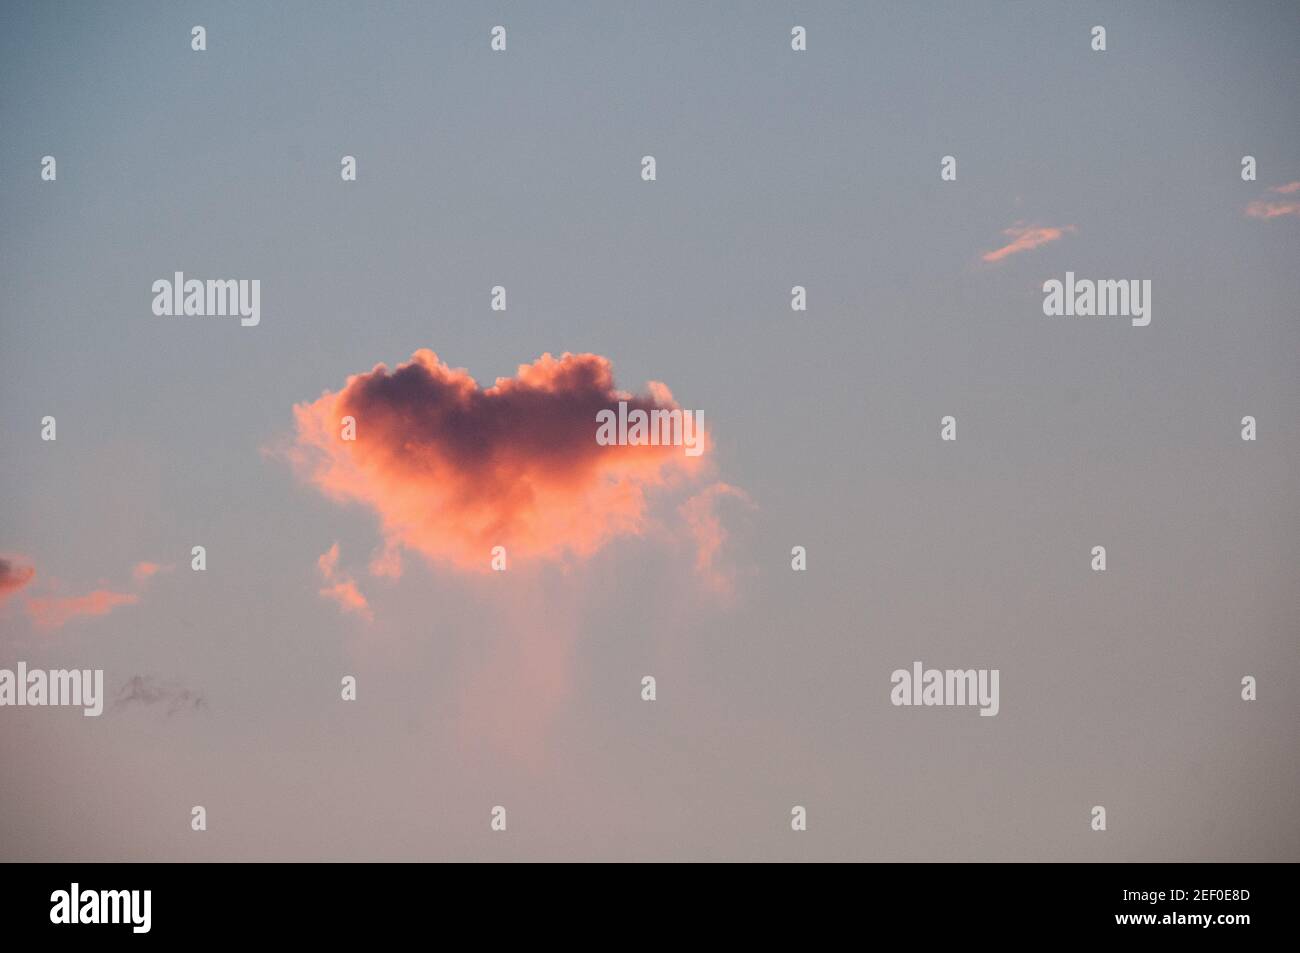 Heart shaped pink cloud in the sky Stock Photo